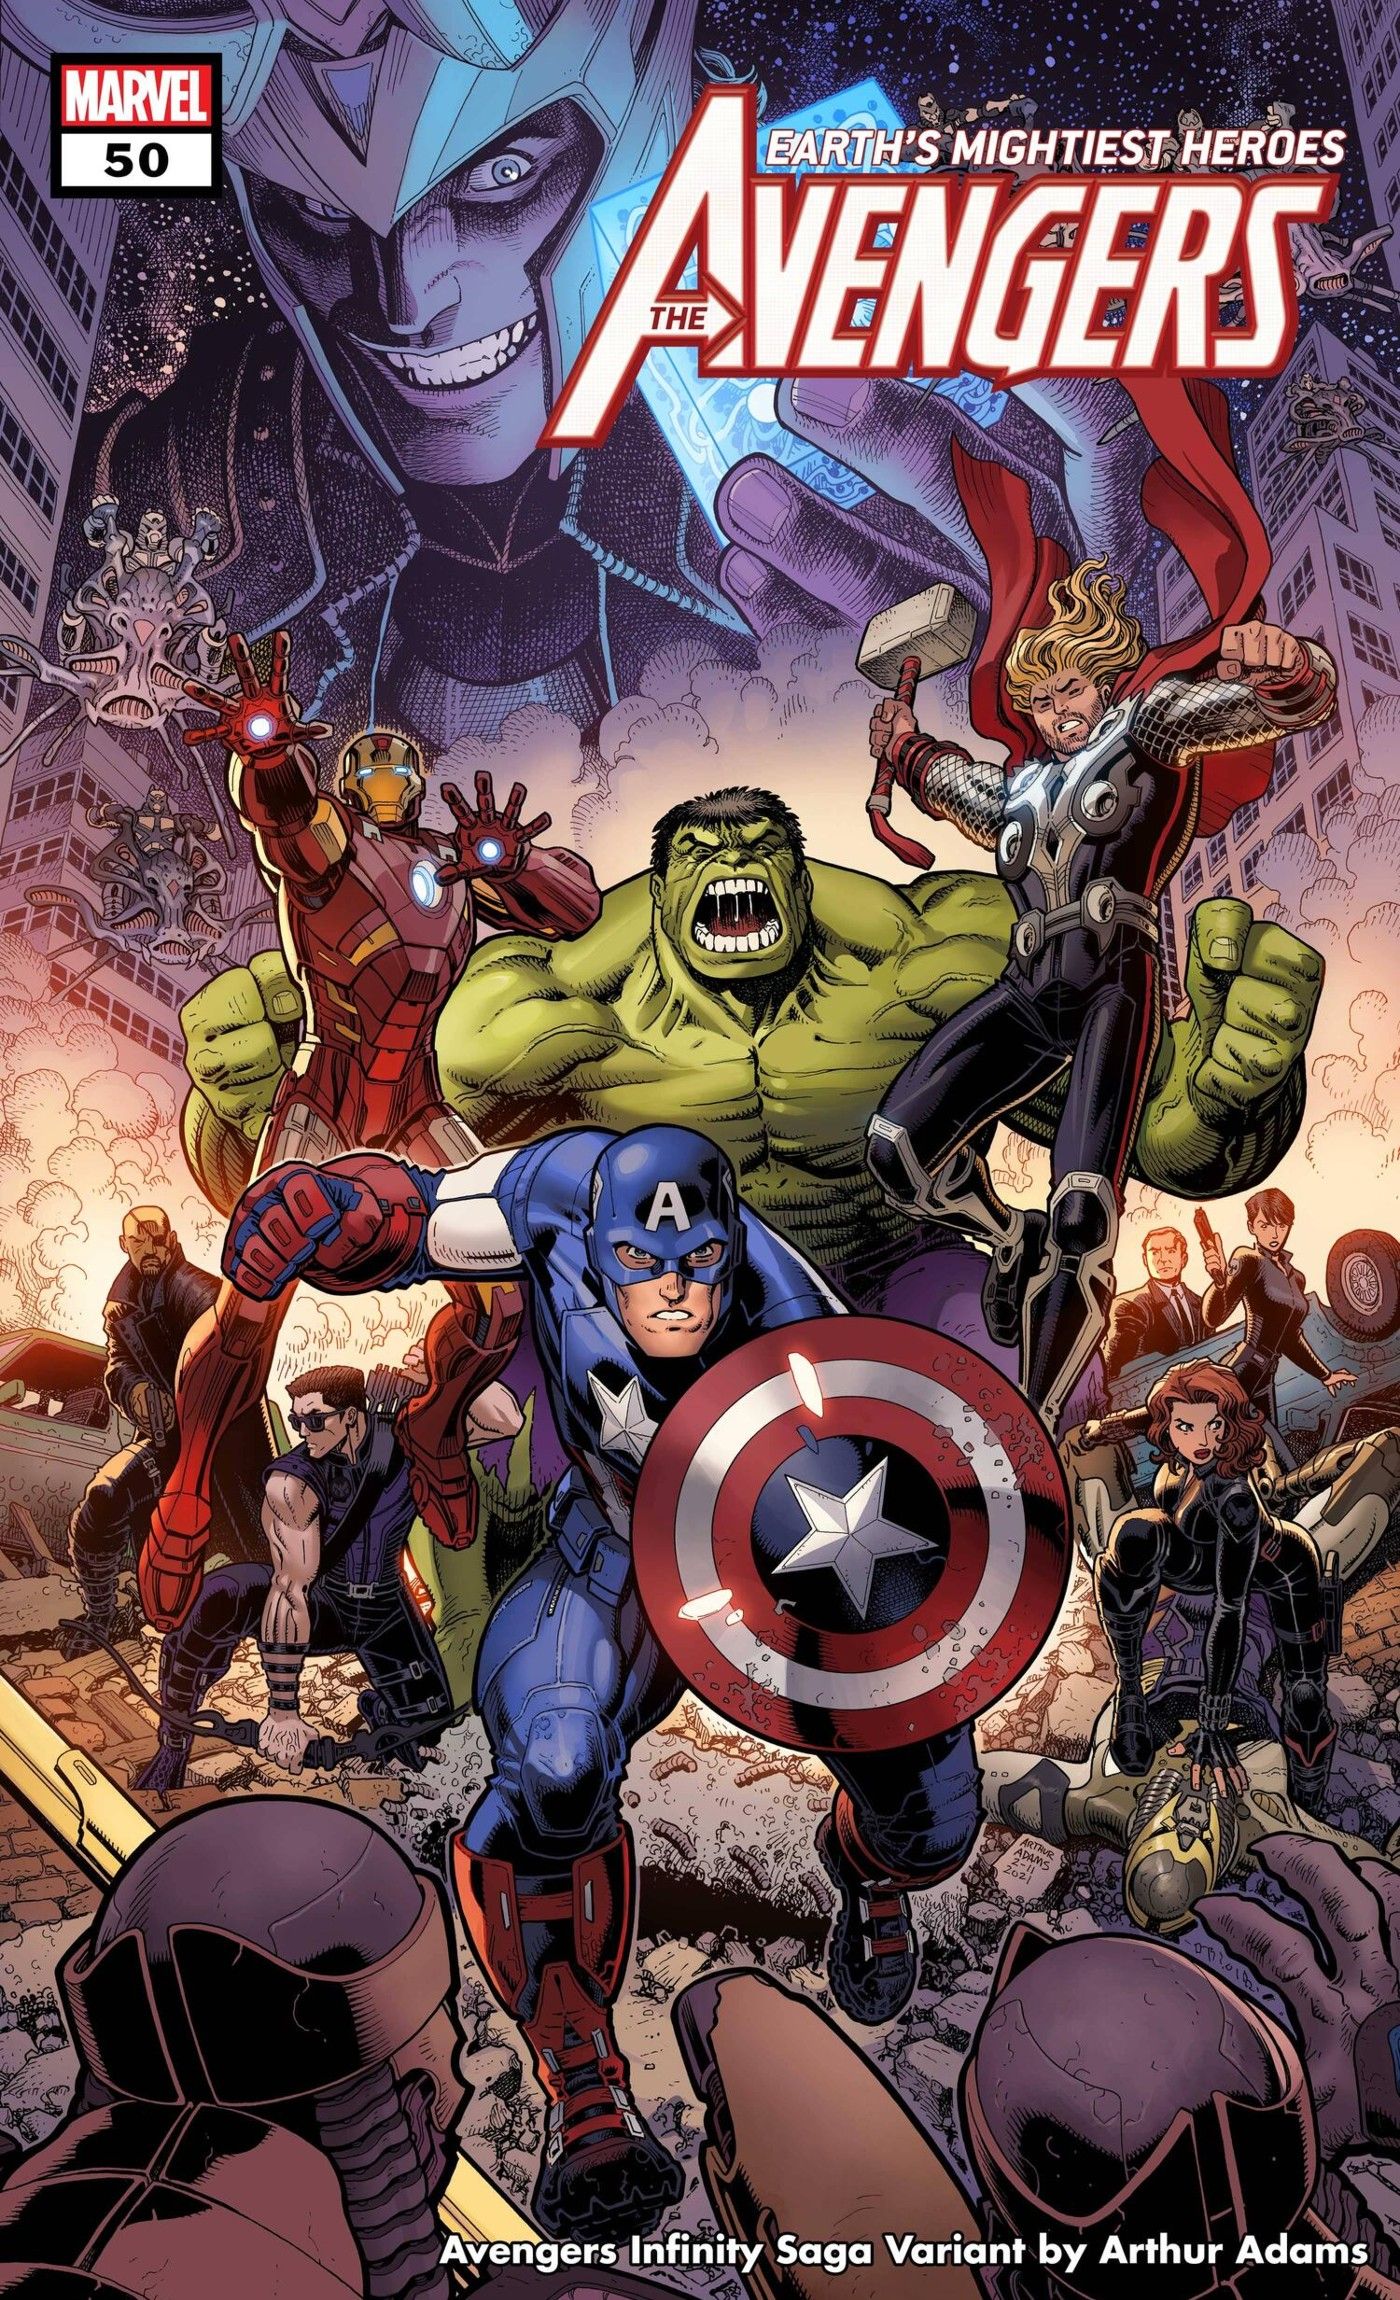 The Avengers' Greatest MCU Phase 1 Battles Recreated in Marvel Covers